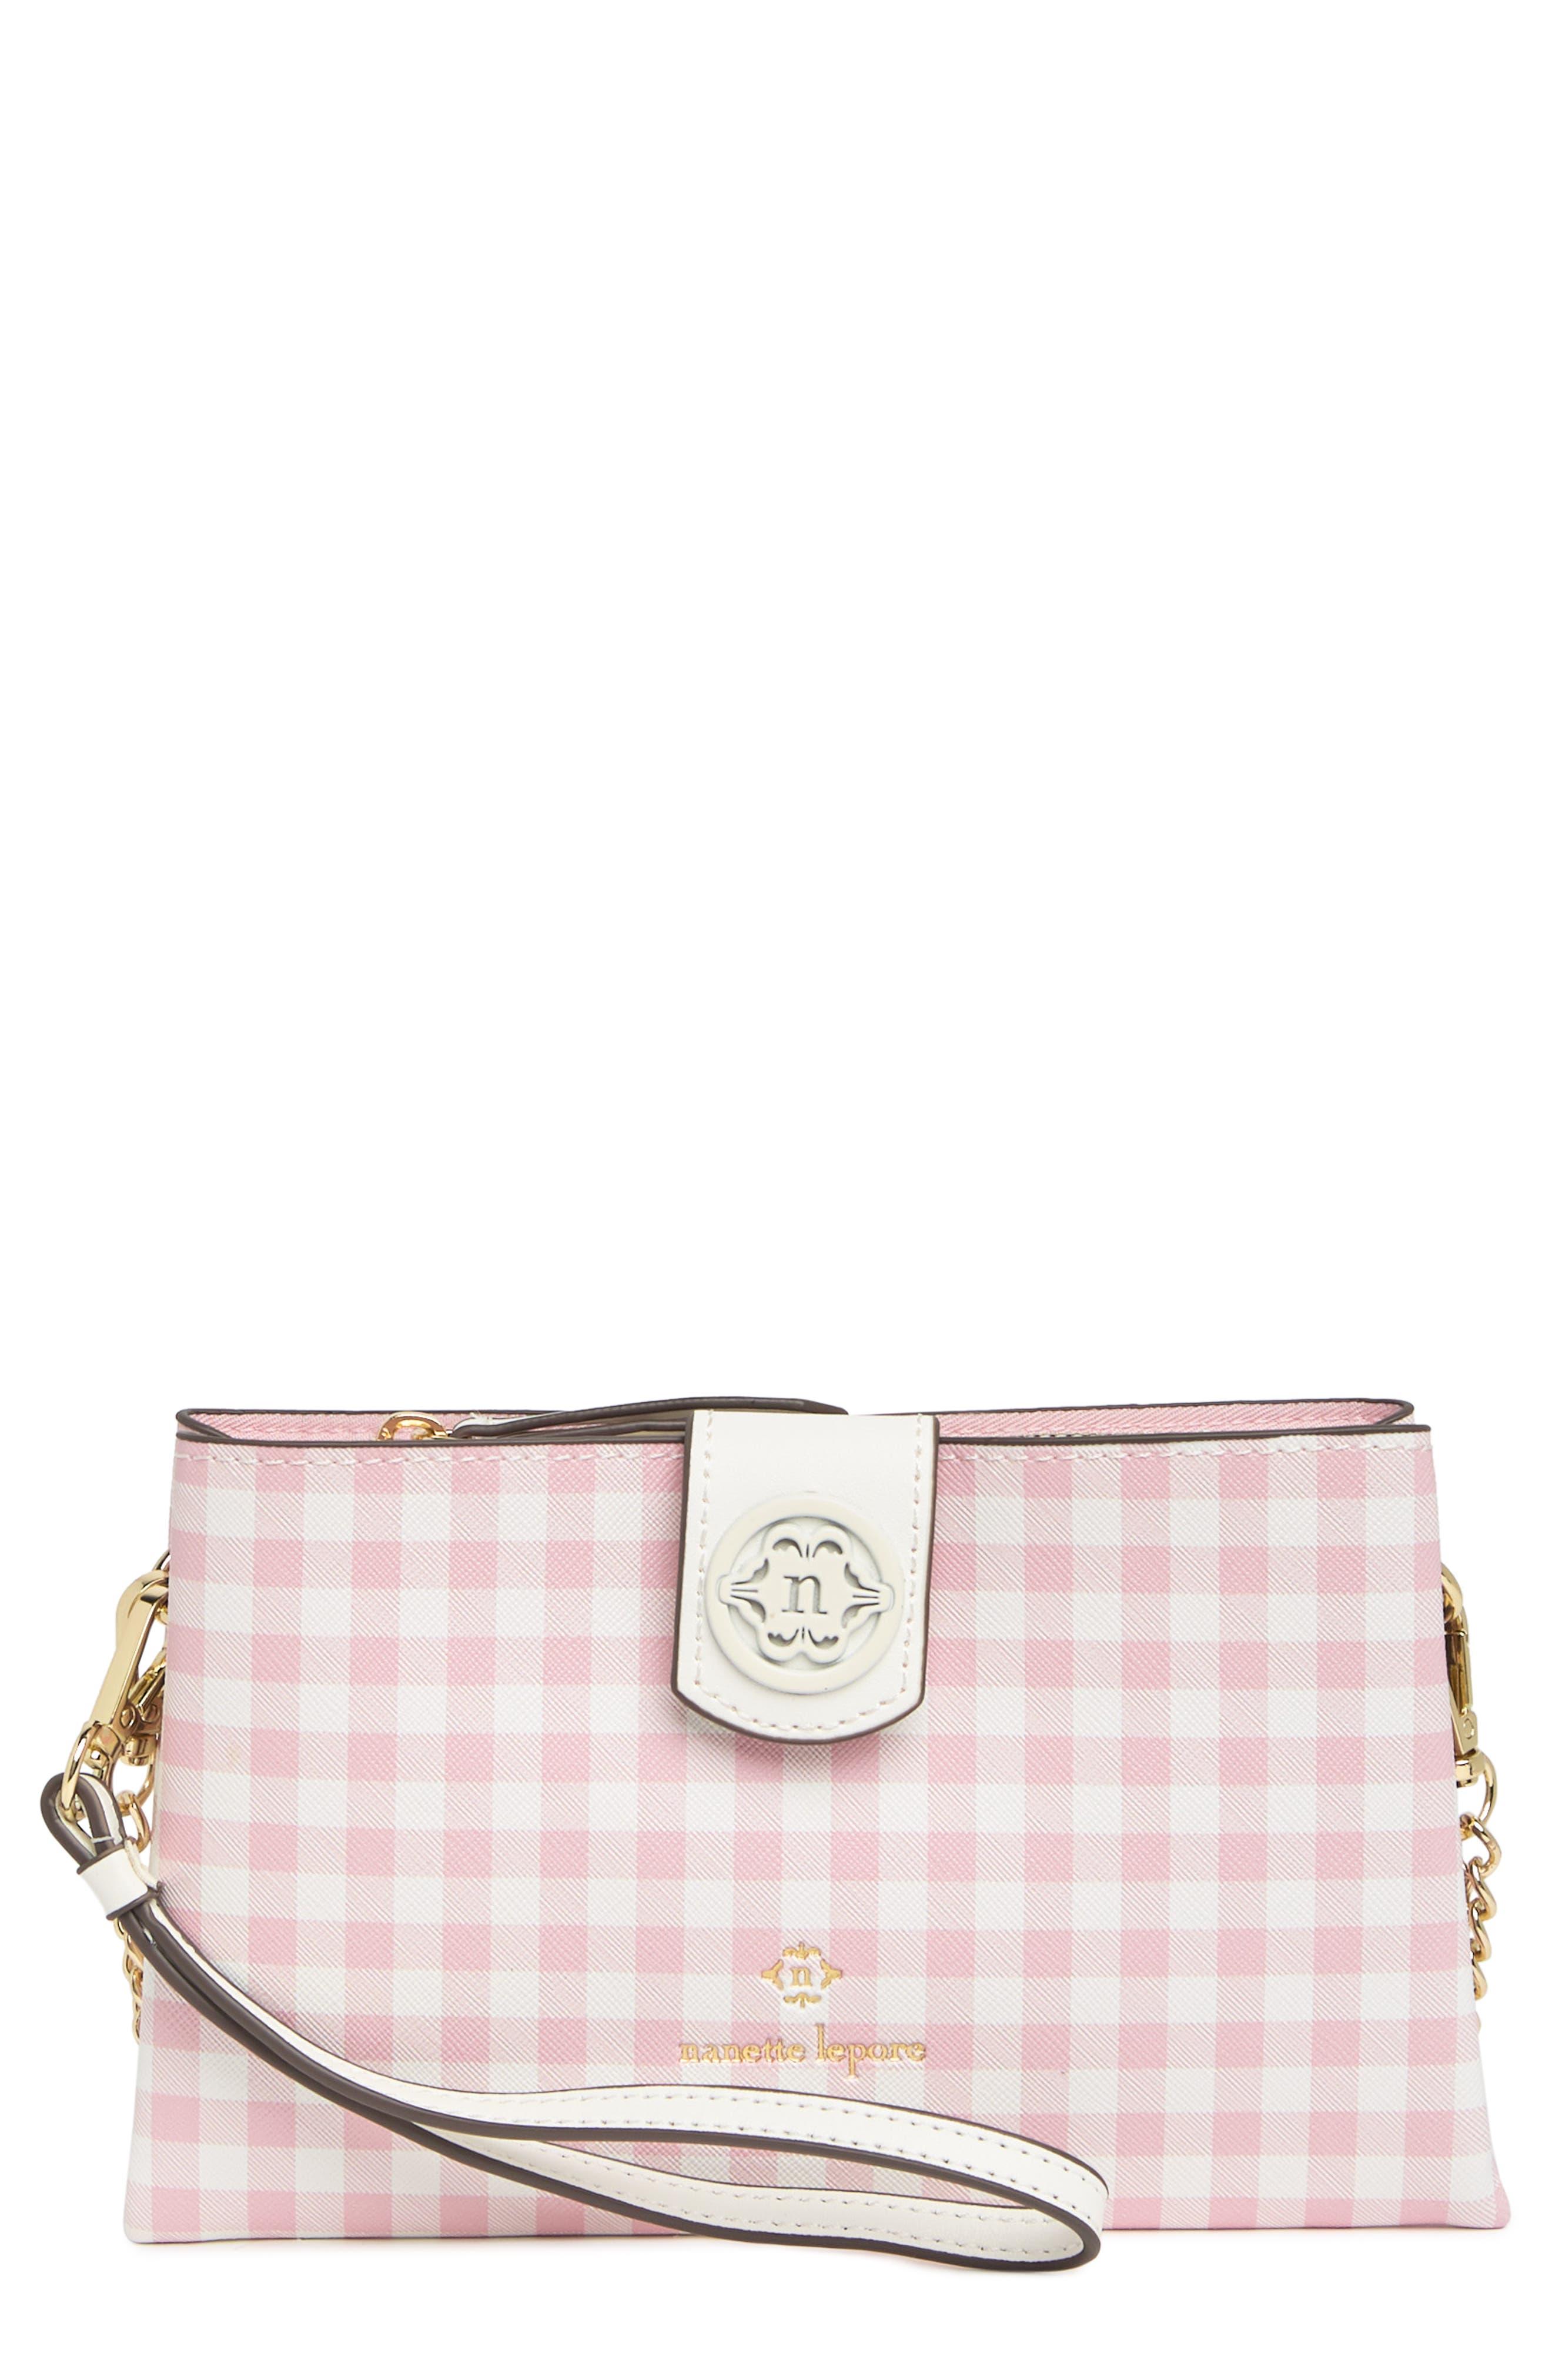 Marc Jacobs The Cosmo Leather Crossbody Bag In Pink Lemonade At Nordstrom  Rack | Lyst